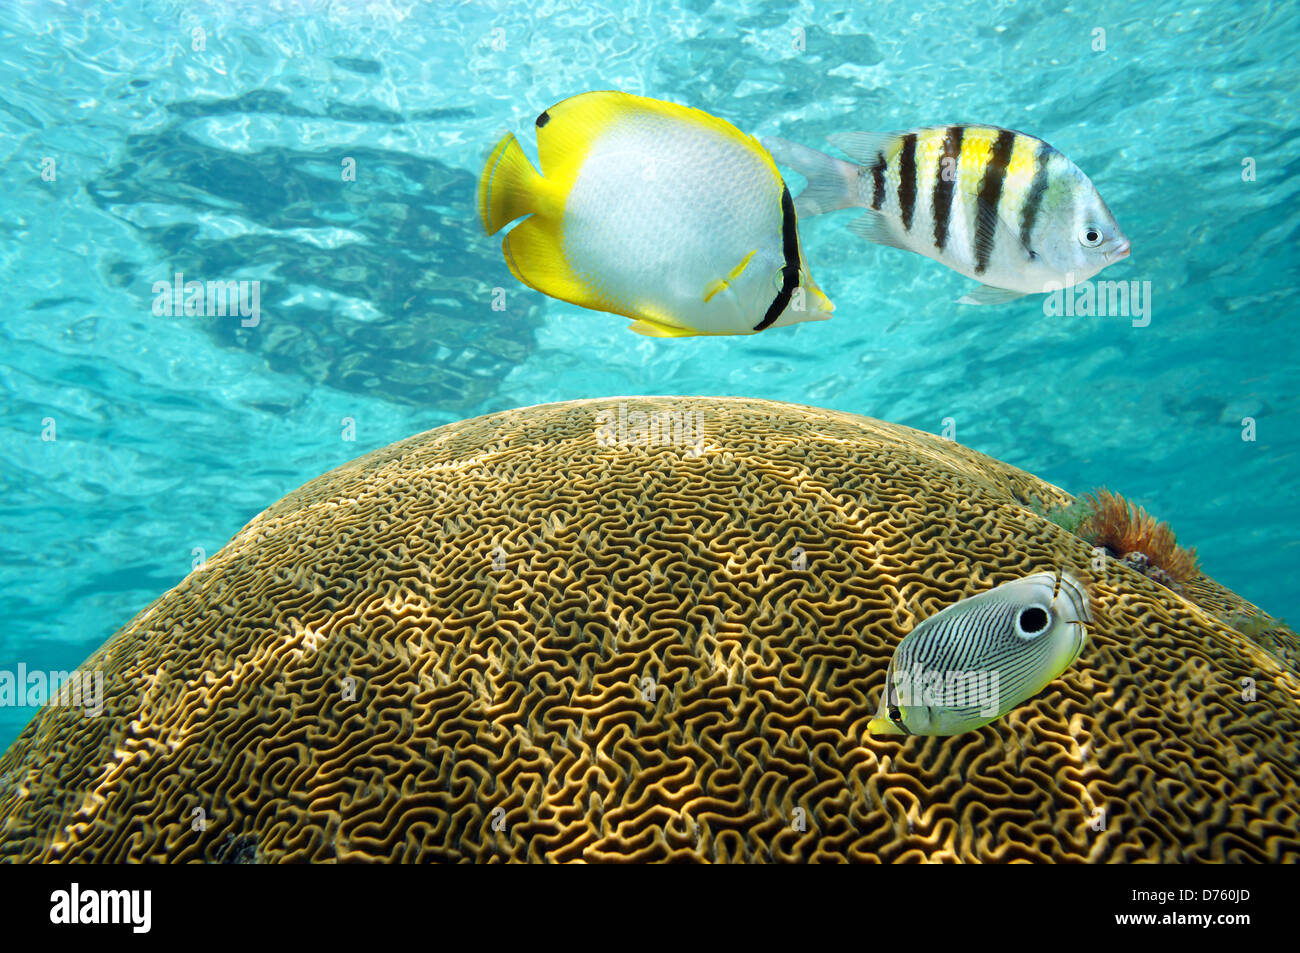 Underwater tropical fish above brain coral with water surface in background, Caribbean sea Stock Photo